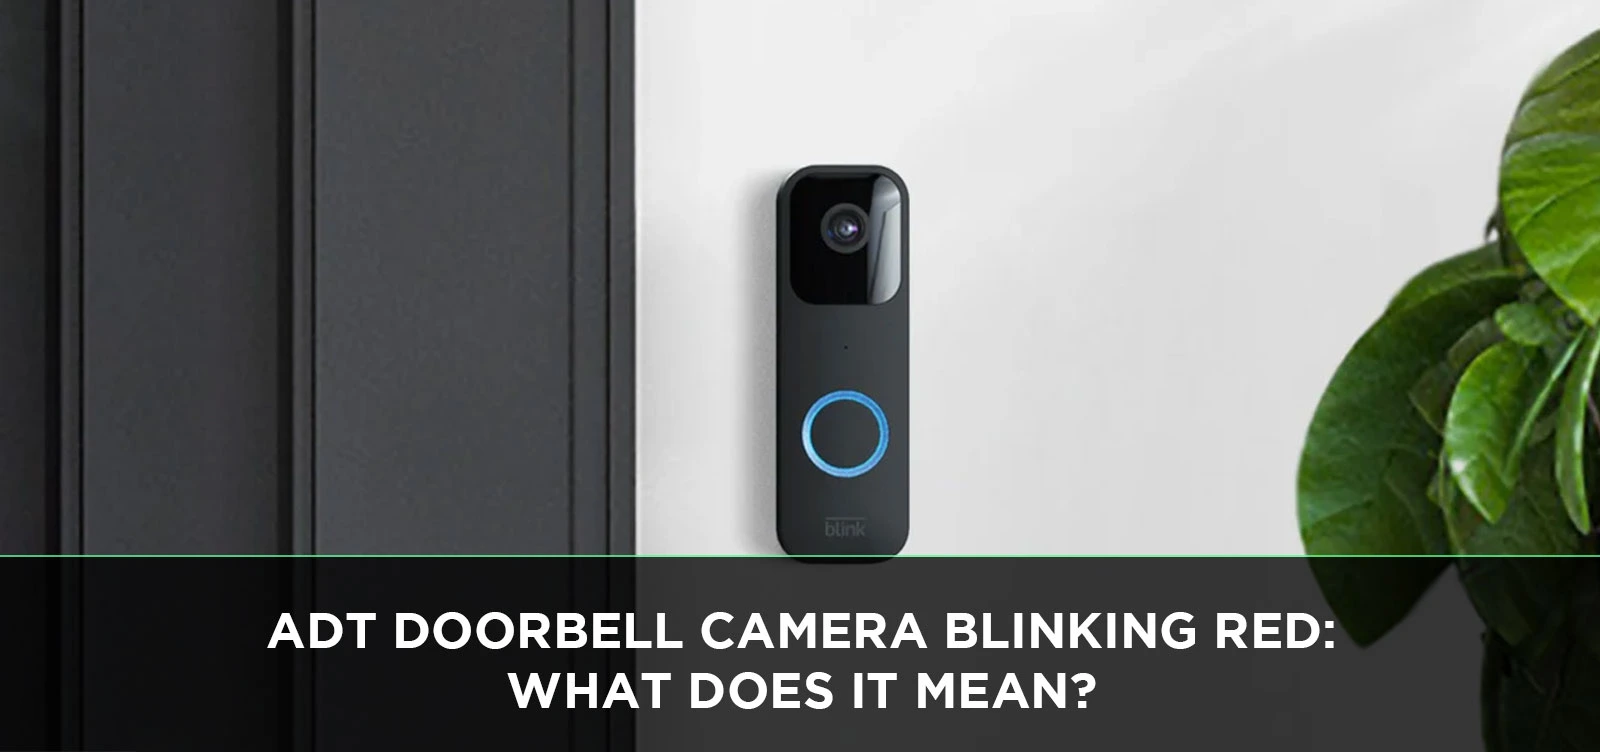 ADT Doorbell Camera Blinking Red: What Does It Mean